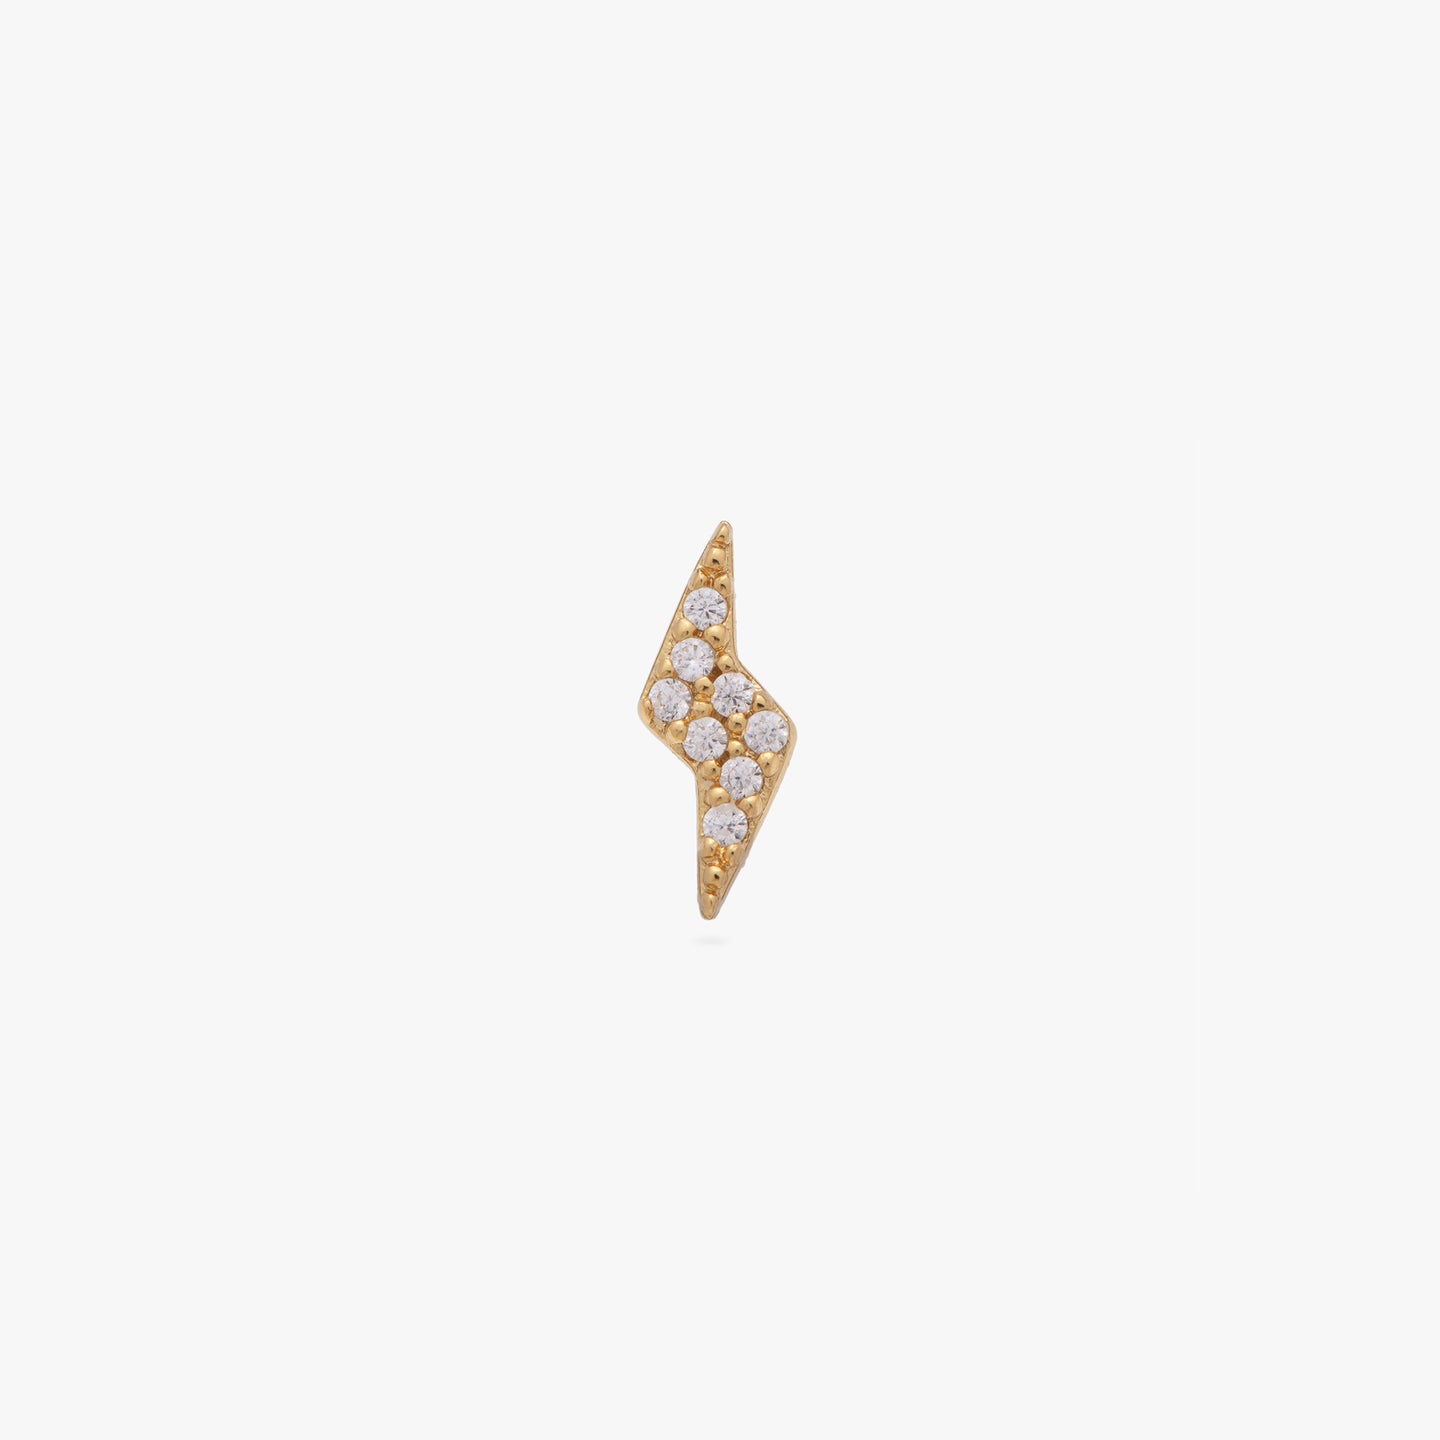 Reversible flatback stud with a Pave Lighting top with a star shaped flatback post color:null|gold/clear